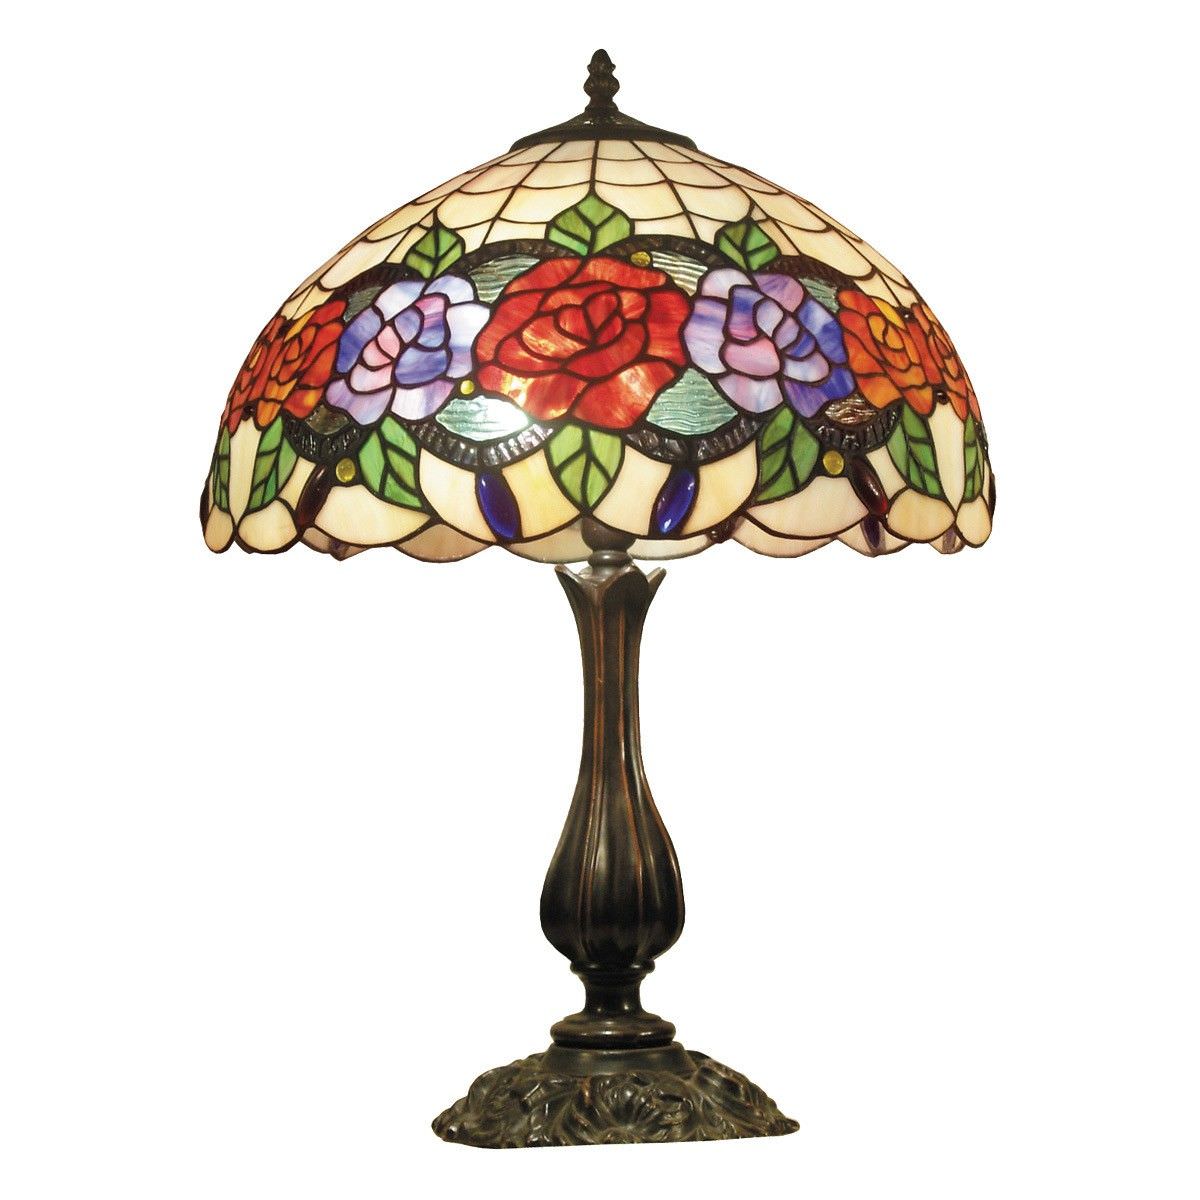 Rose Garden Tiffany Style Stained Glass Table Lamp, Large